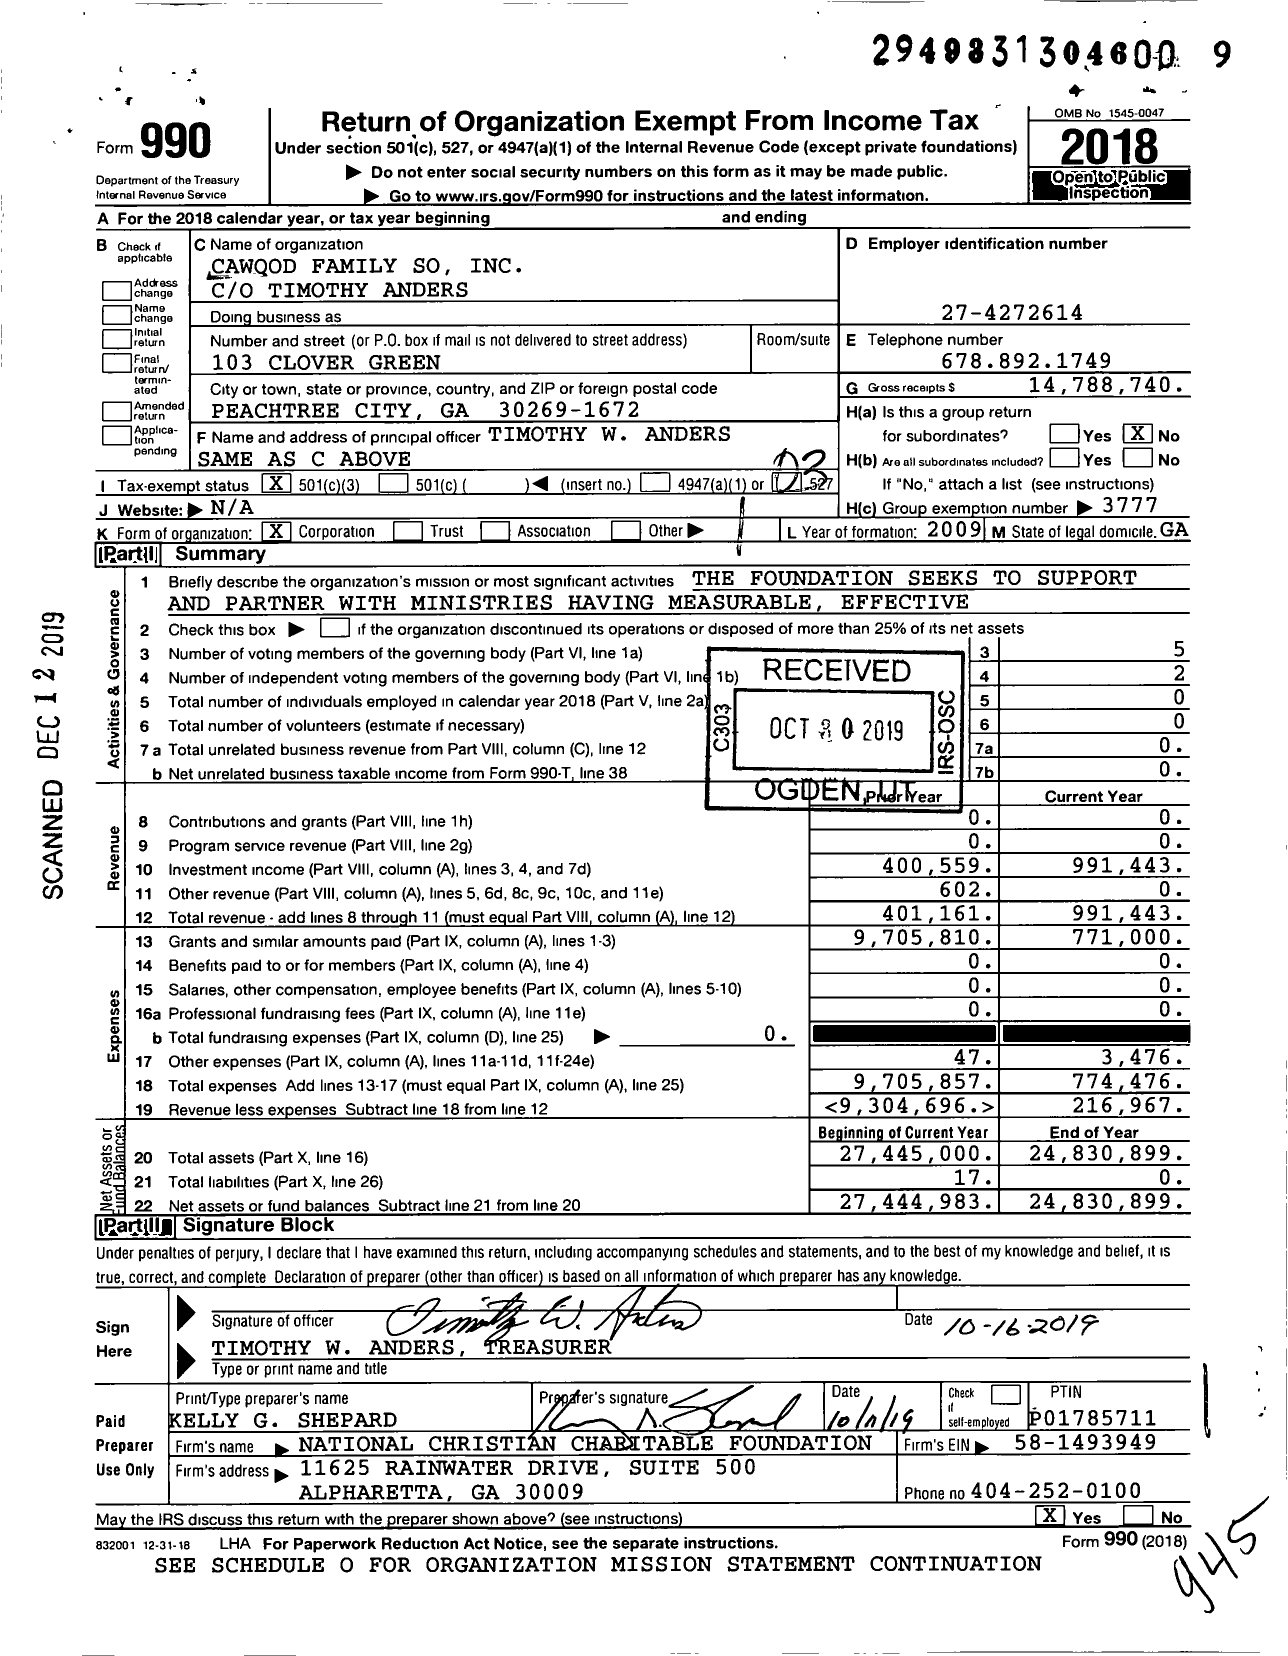 Image of first page of 2018 Form 990 for Cawood Family